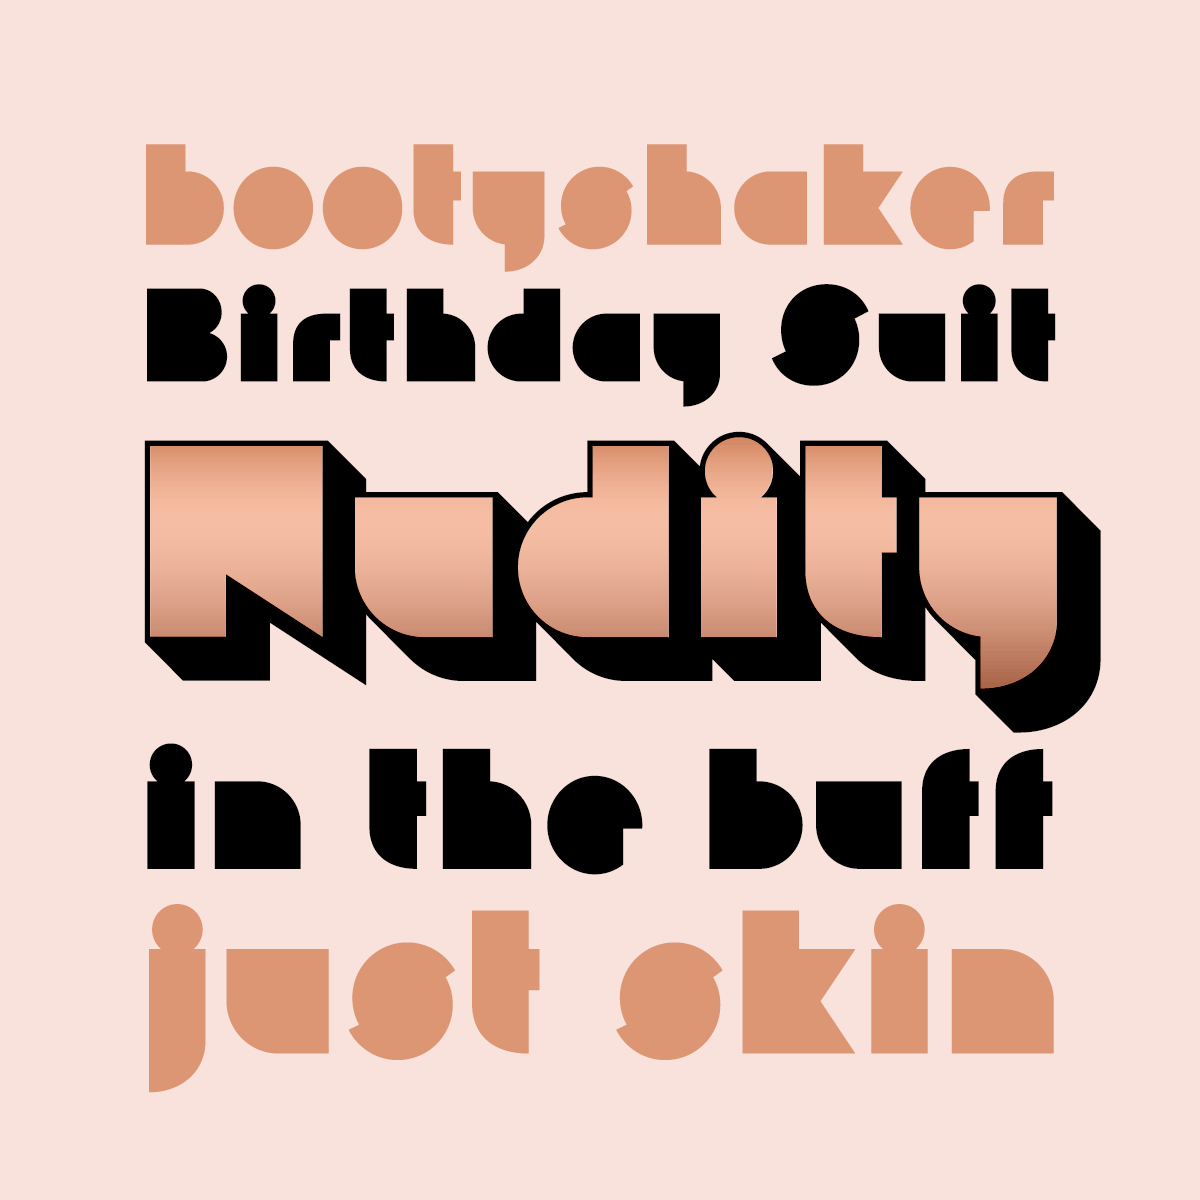 Nudity font by Pink Broccoli